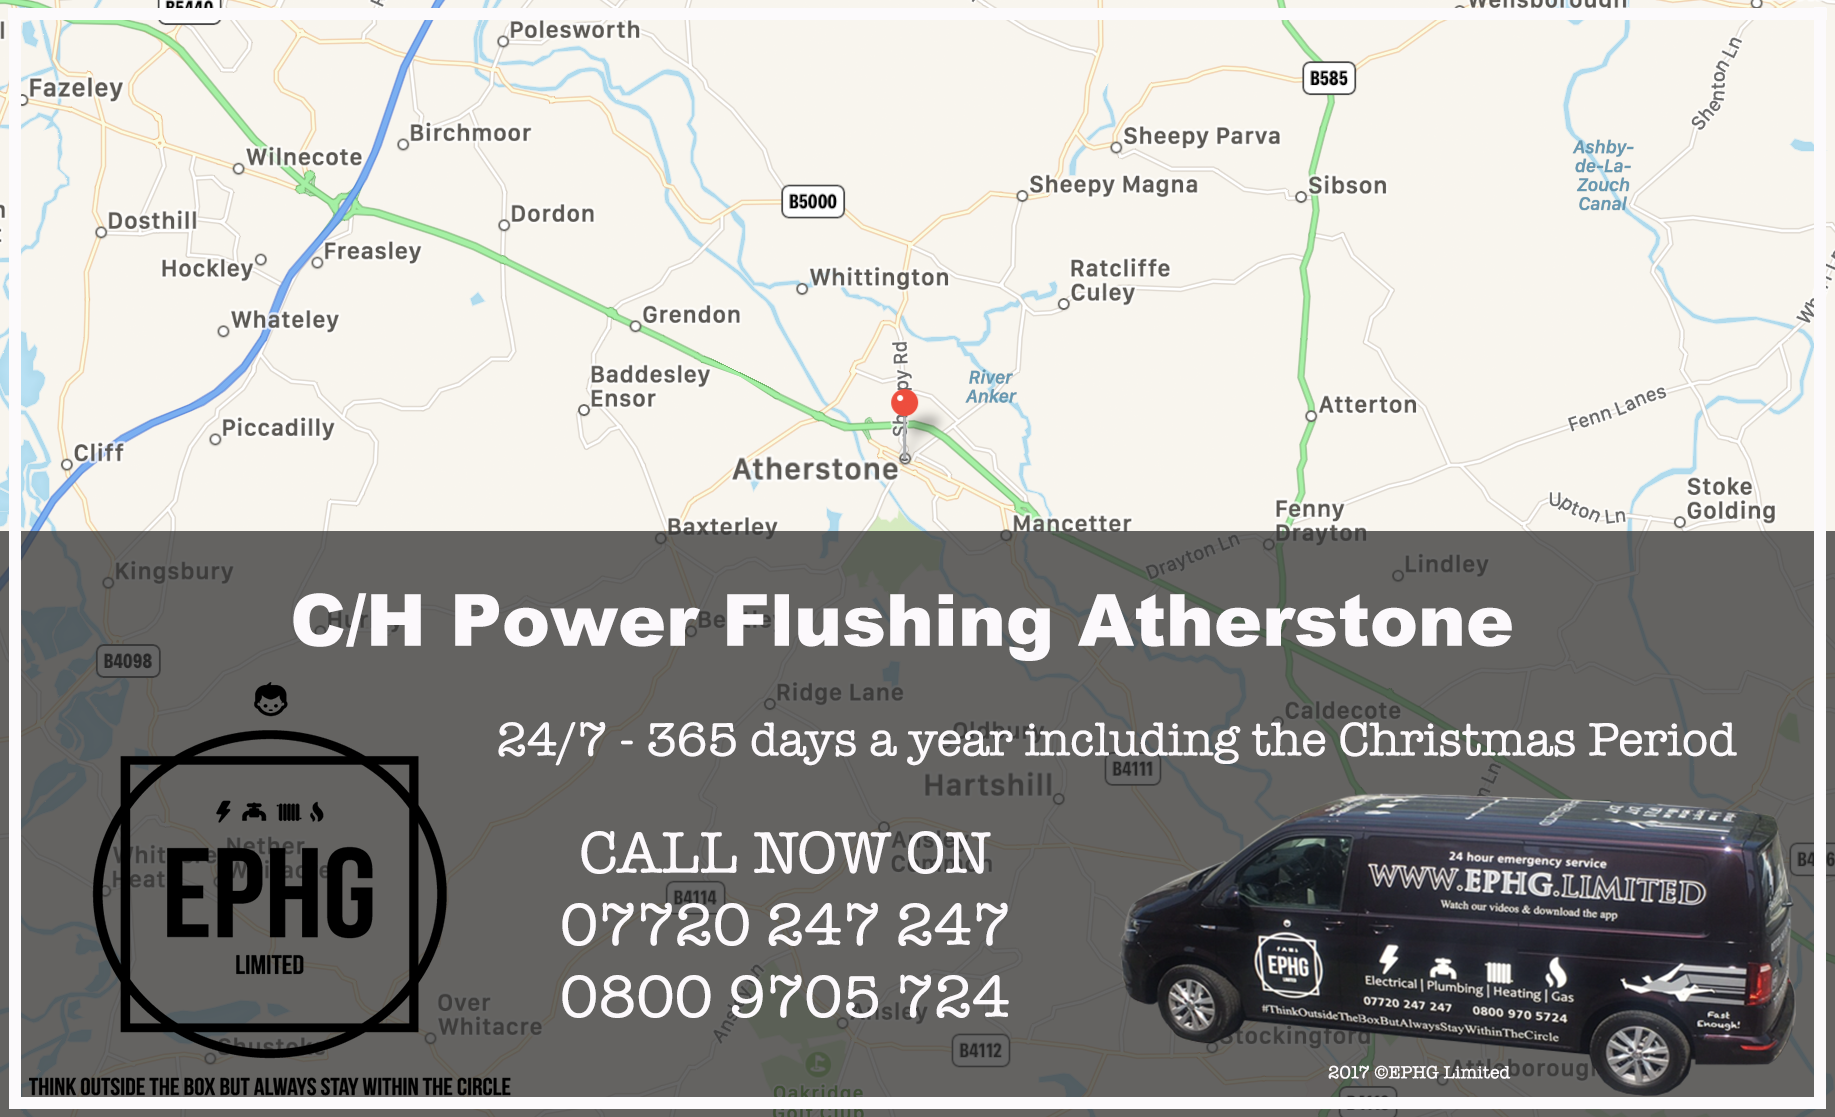 Central Heating Power Flush Atherstone